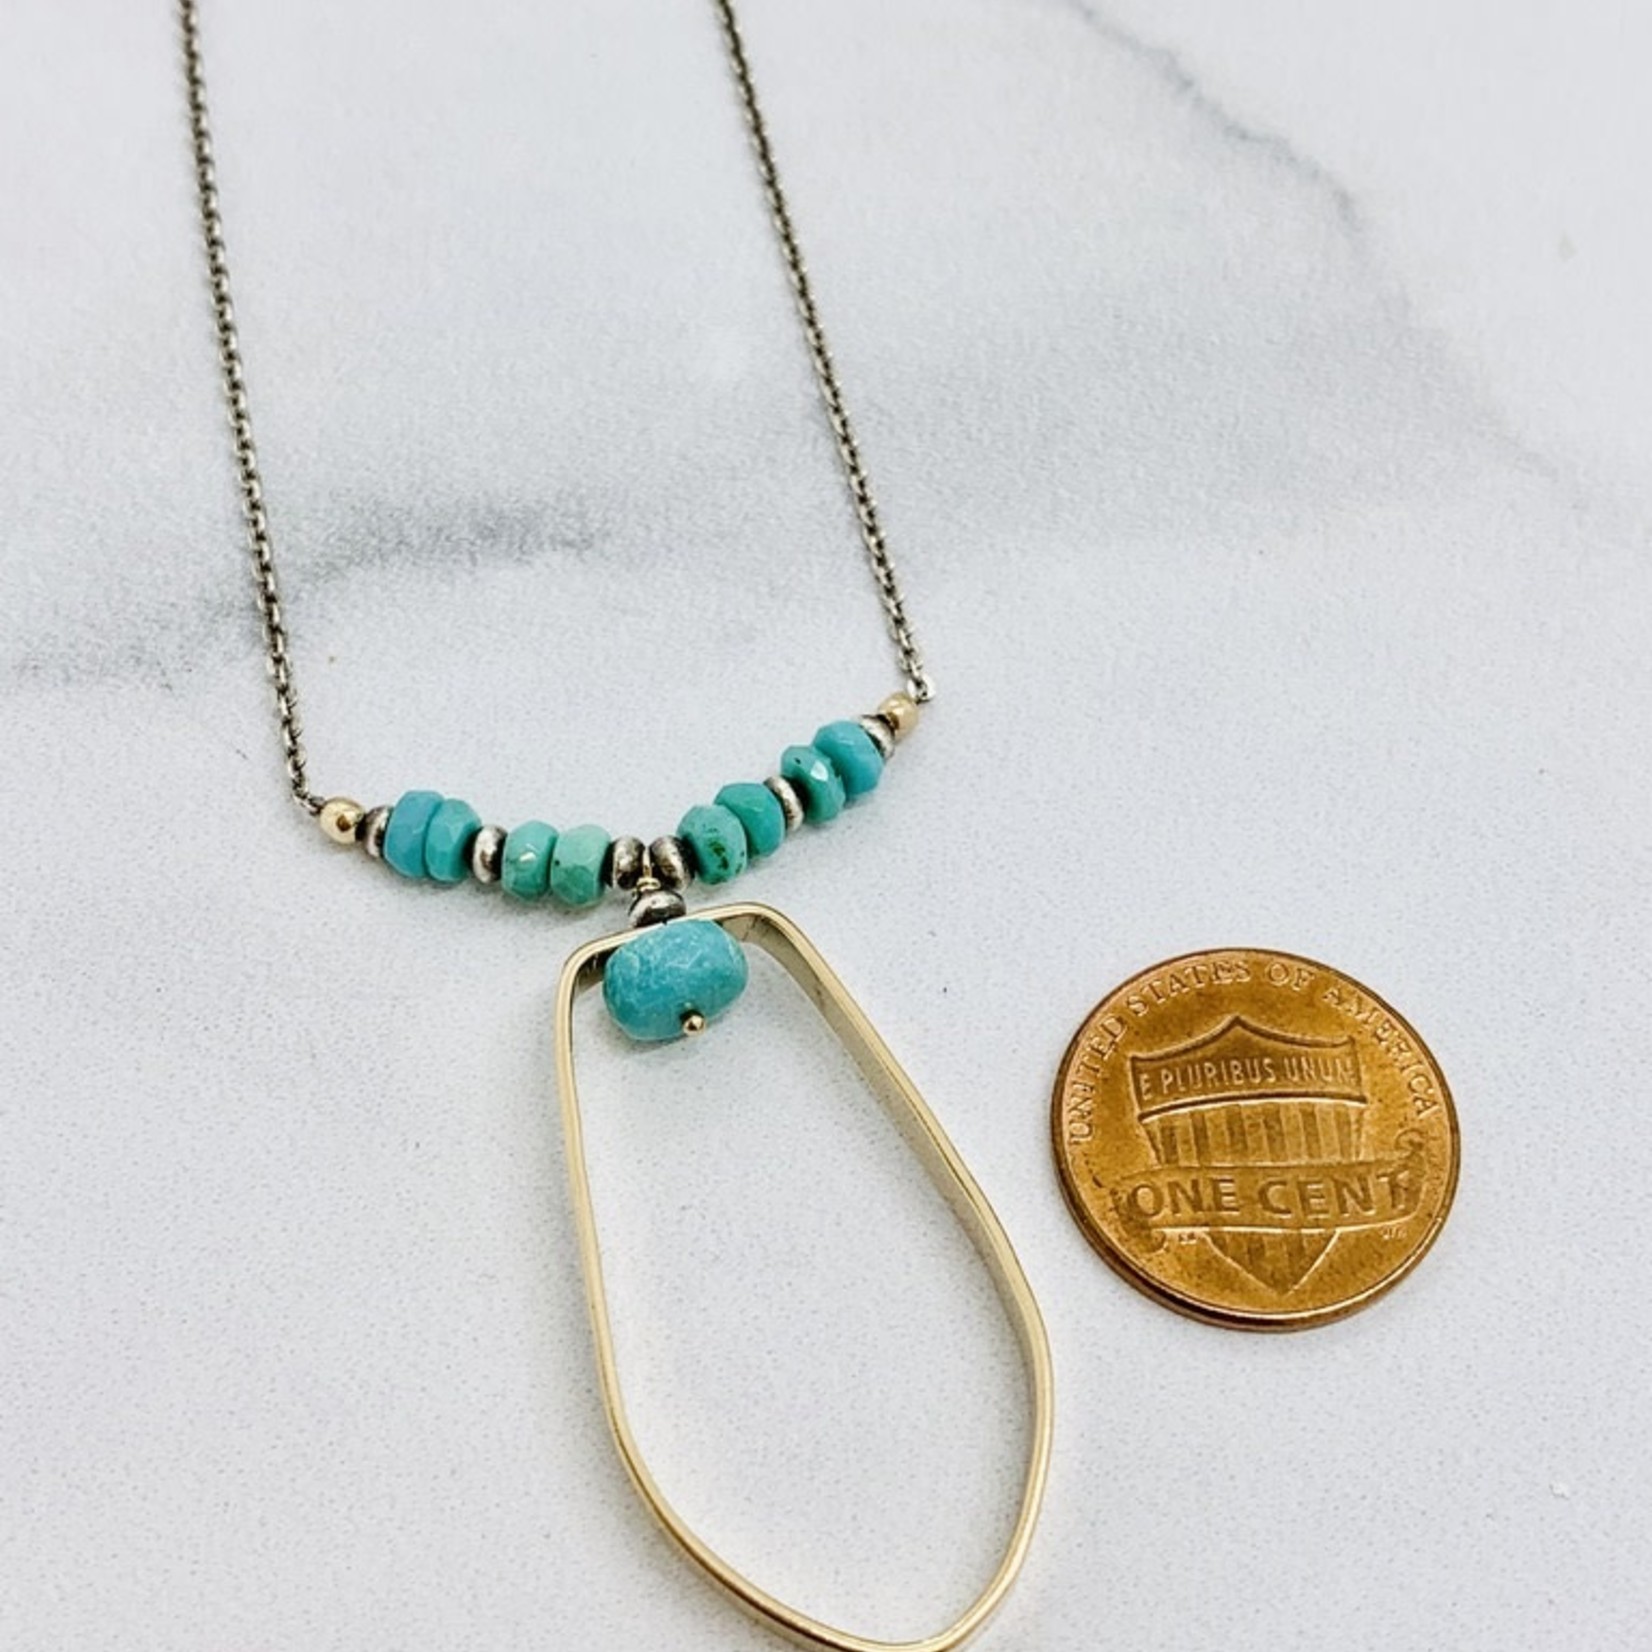 Handmade Necklace with 14k Gold Filled Shape with Faceted Arizona Turquoise on Oxidized Sterling Chain